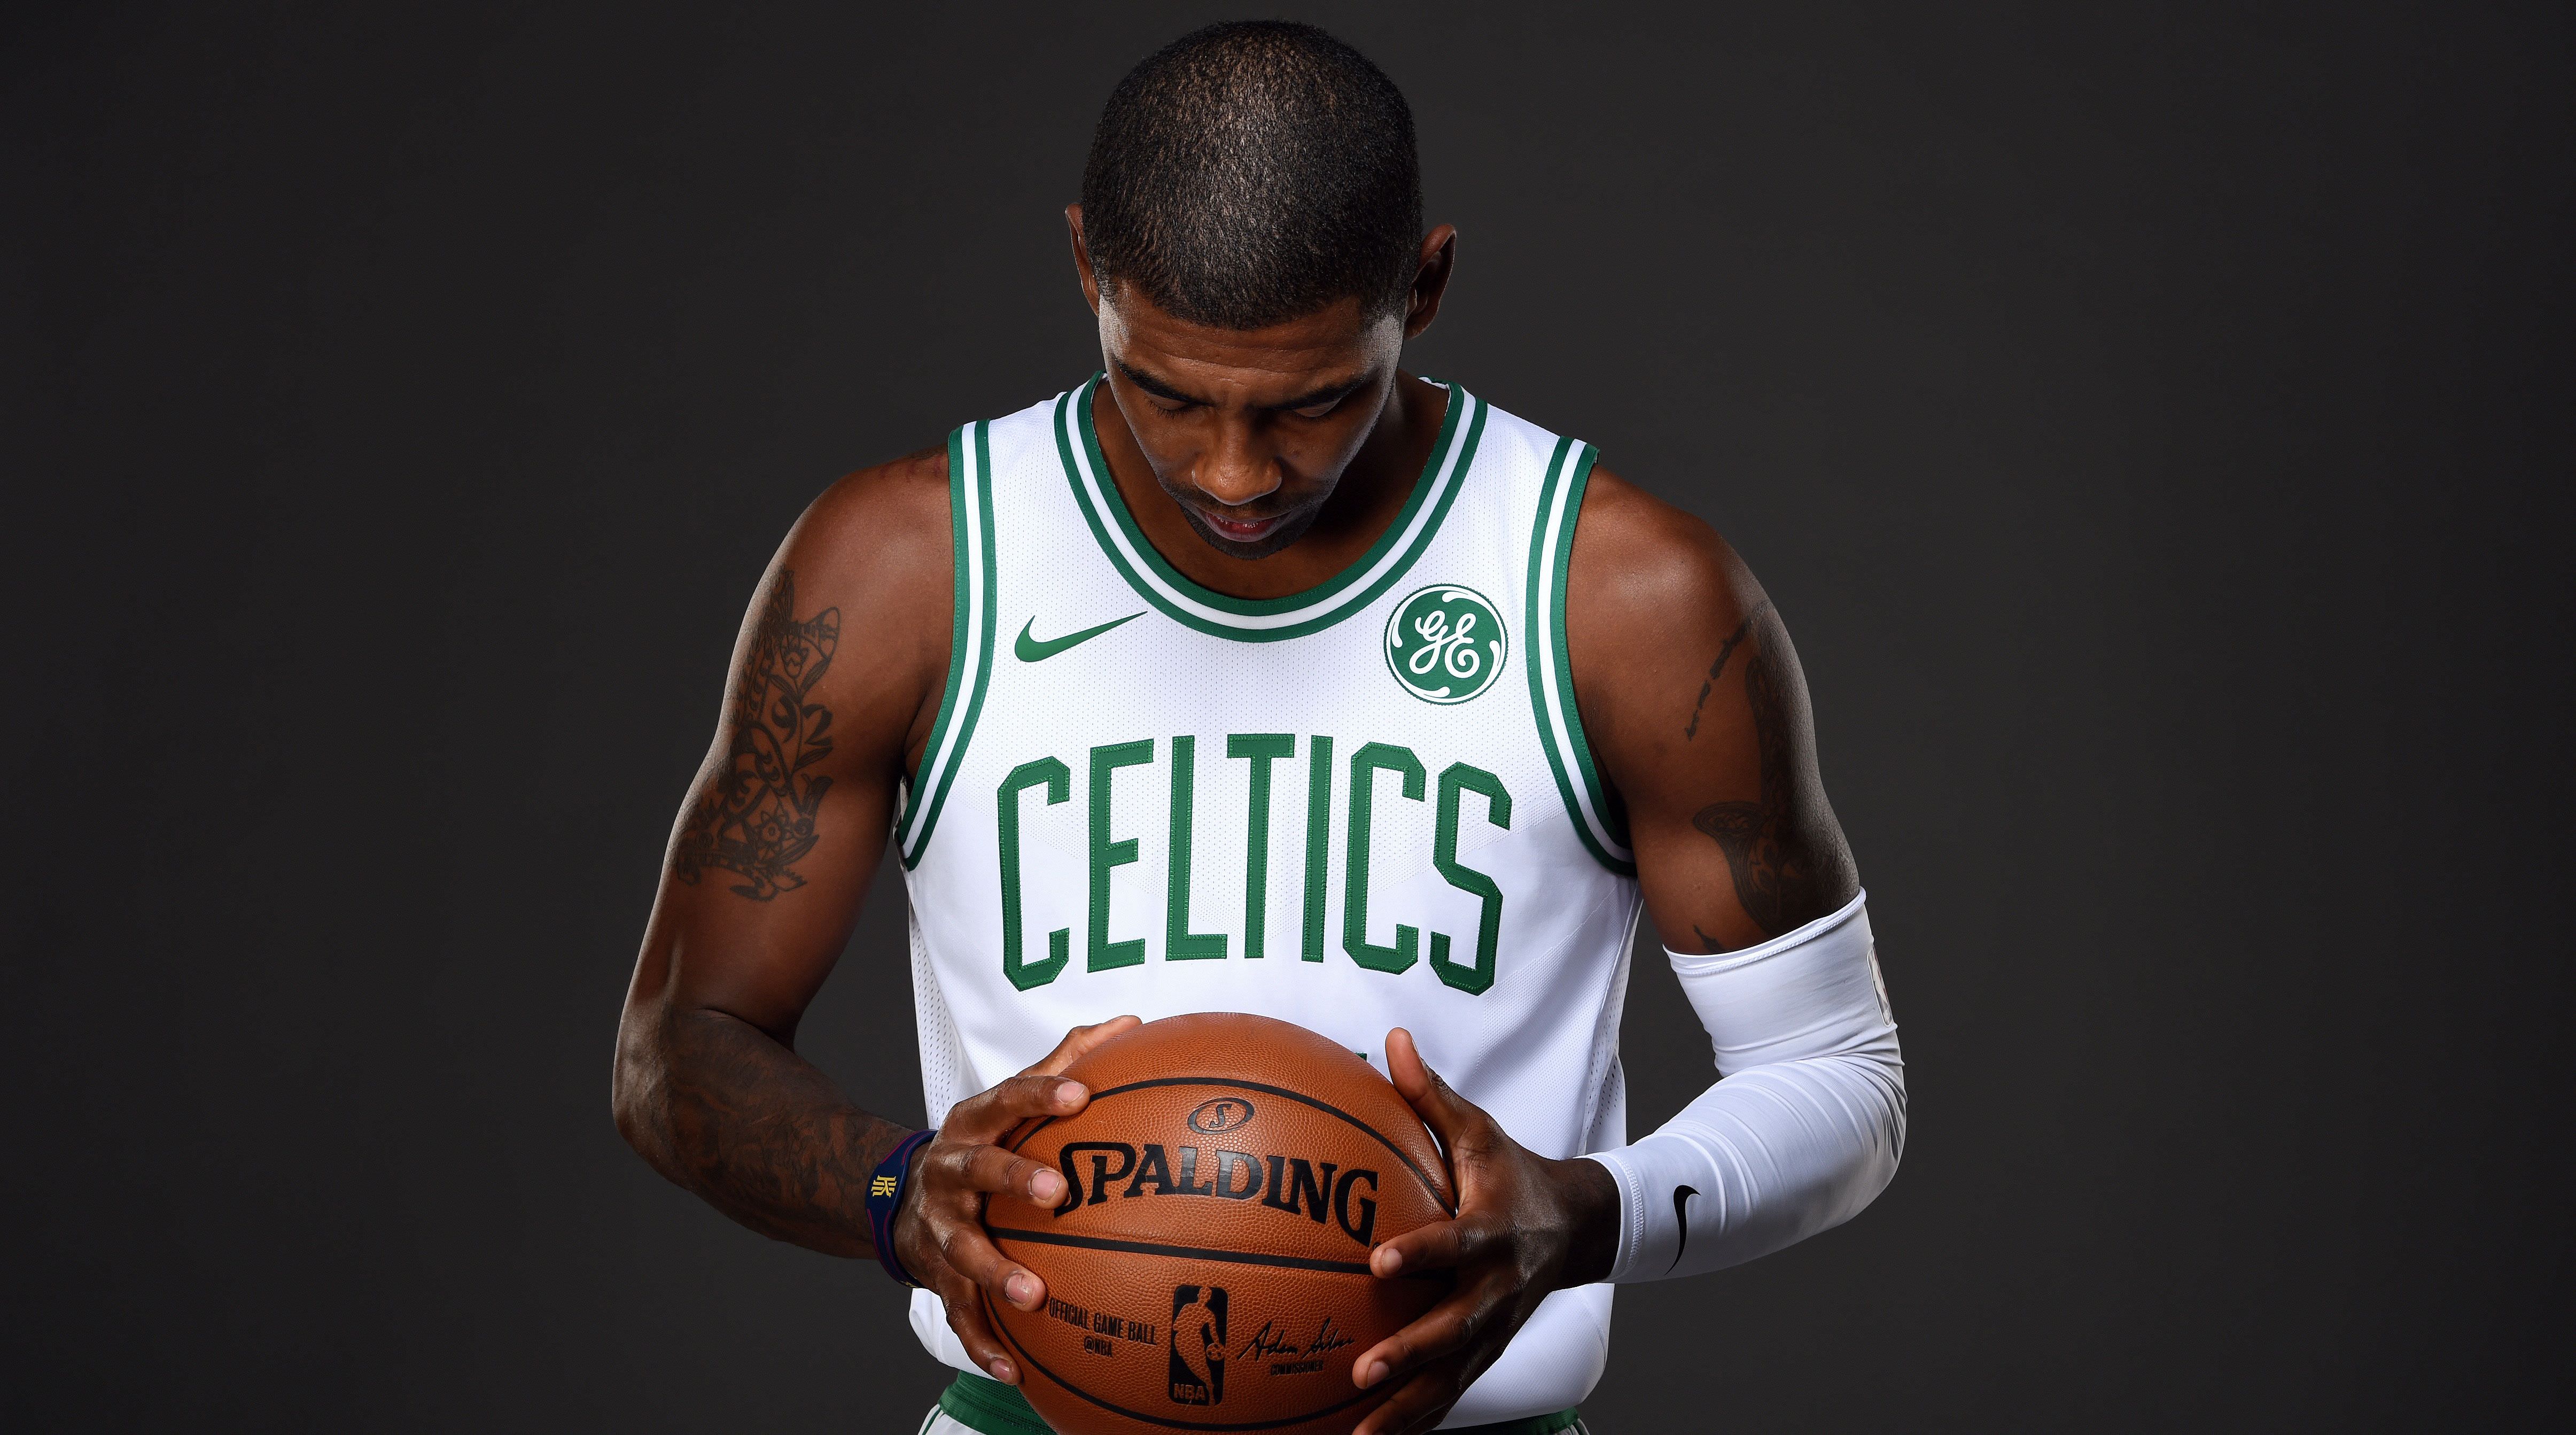 Download Kyrie Irving Celtics HD 2020 iPhone 11 4K Photos Mobile